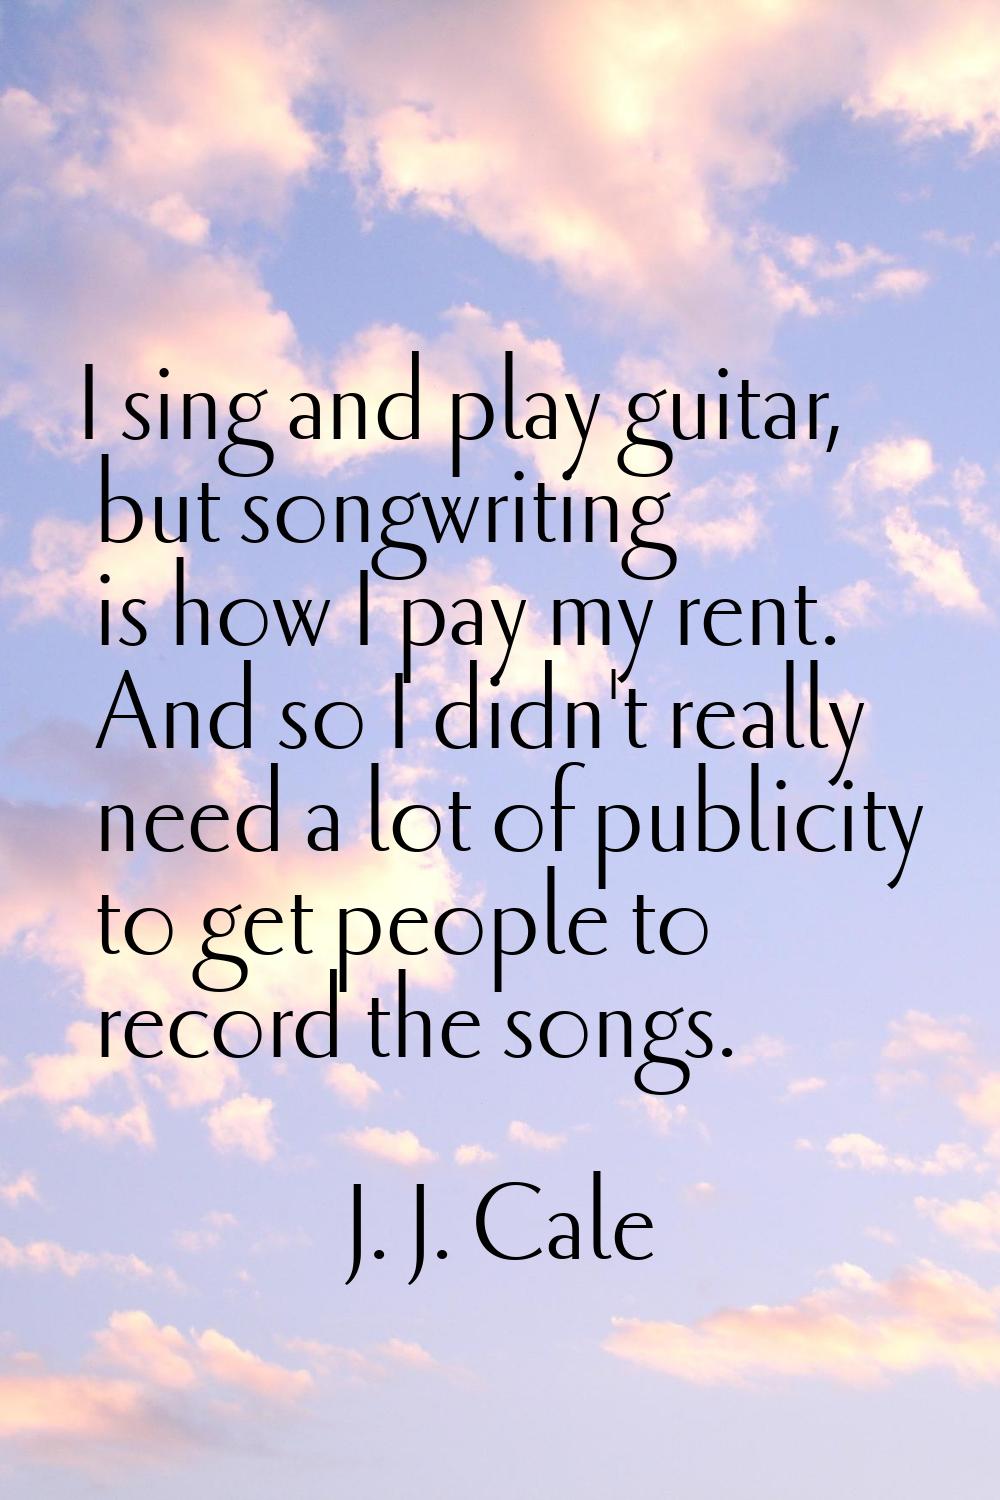 I sing and play guitar, but songwriting is how I pay my rent. And so I didn't really need a lot of 